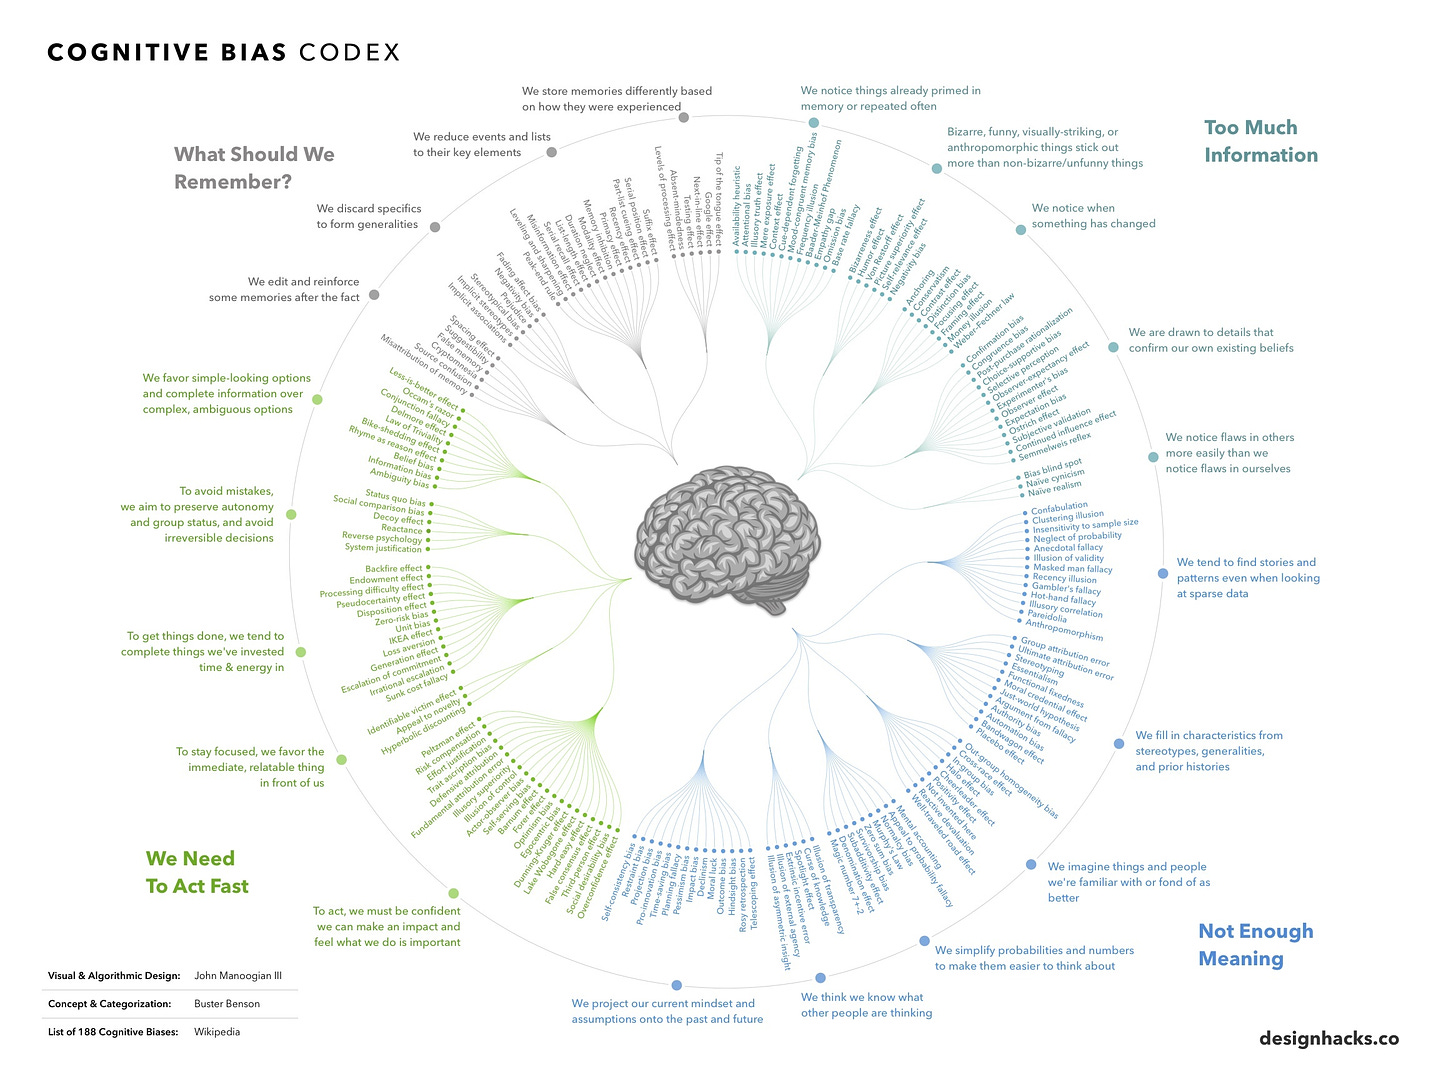 Every Cognitive Bias in One Infographic